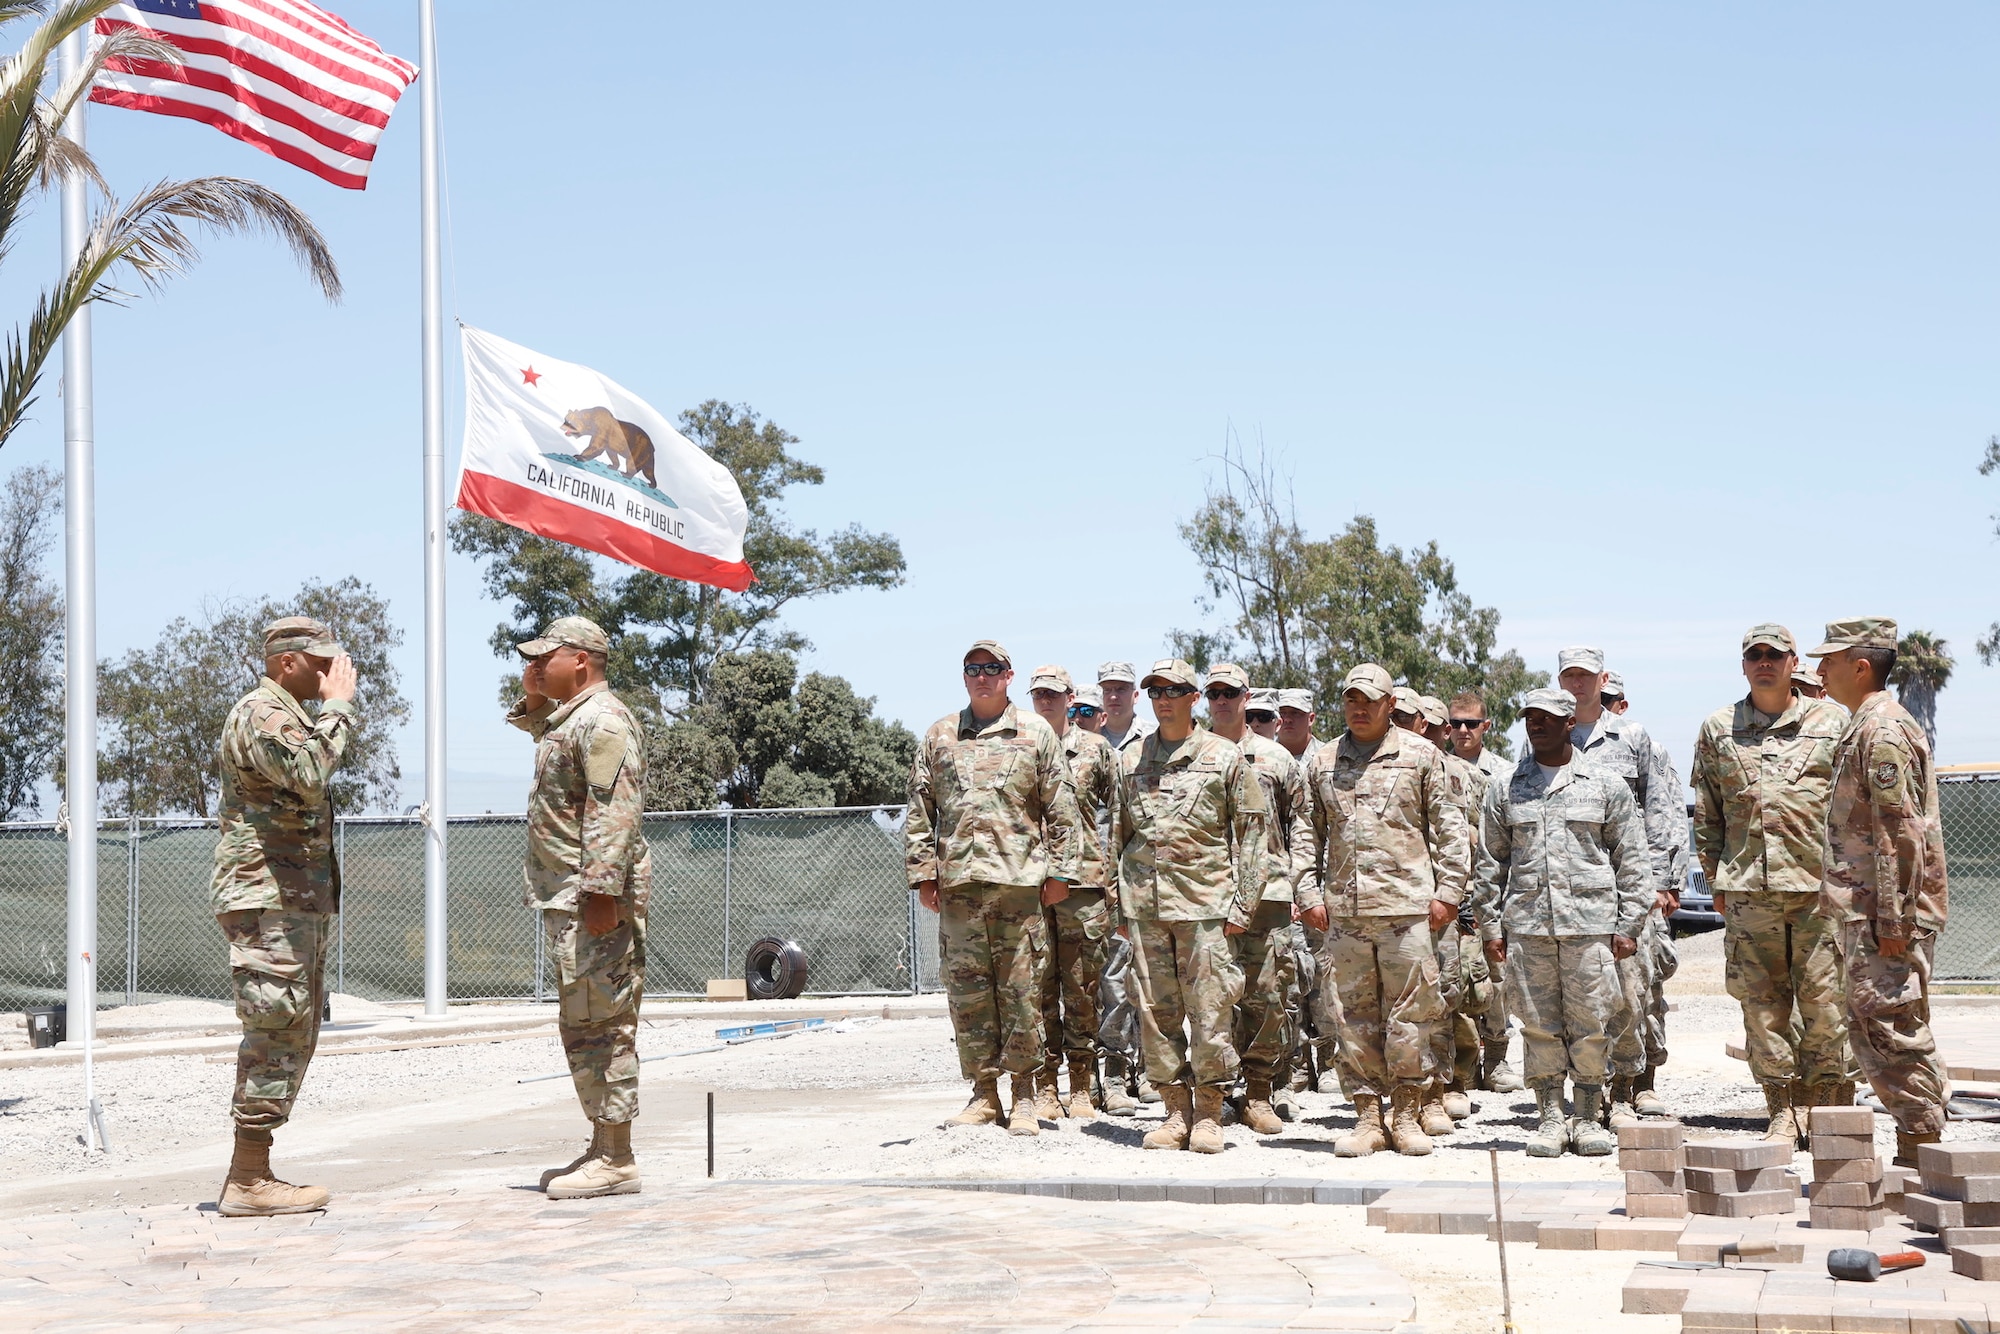 U.S. Air National Guard members from the 146 Civil Engineer Squadron perform a re-enlistment ceremony outside the headquarters building at the Channel Islands Air National Guard Station, August 9, 2019. U.S. Air National Guard photo by Senior Airman Todd Senff.